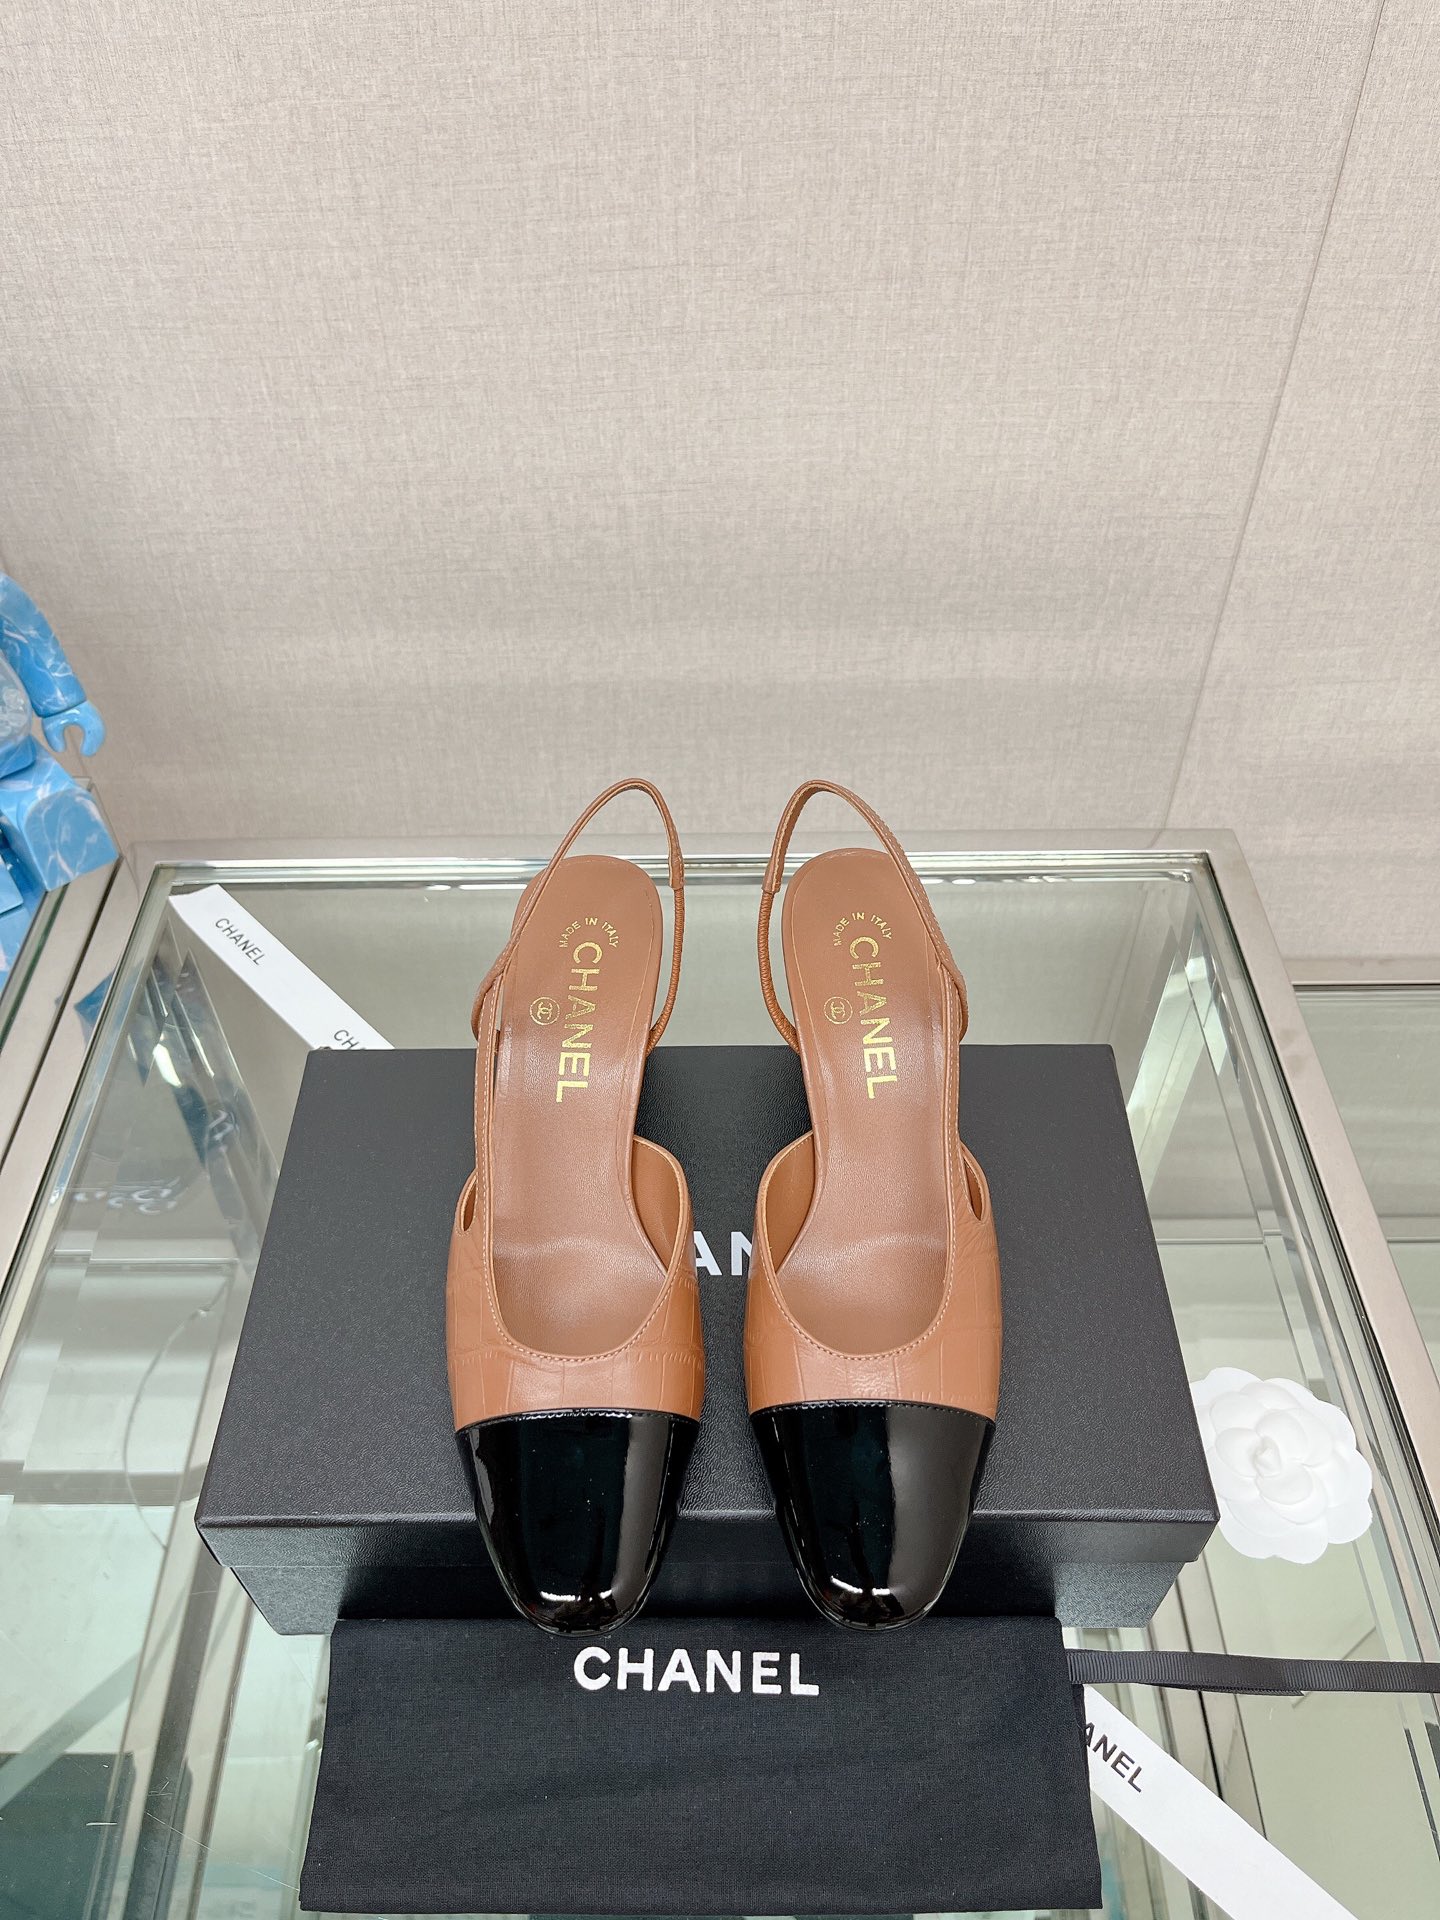 Chanel Shoes Sandals Cowhide Genuine Leather Sheepskin